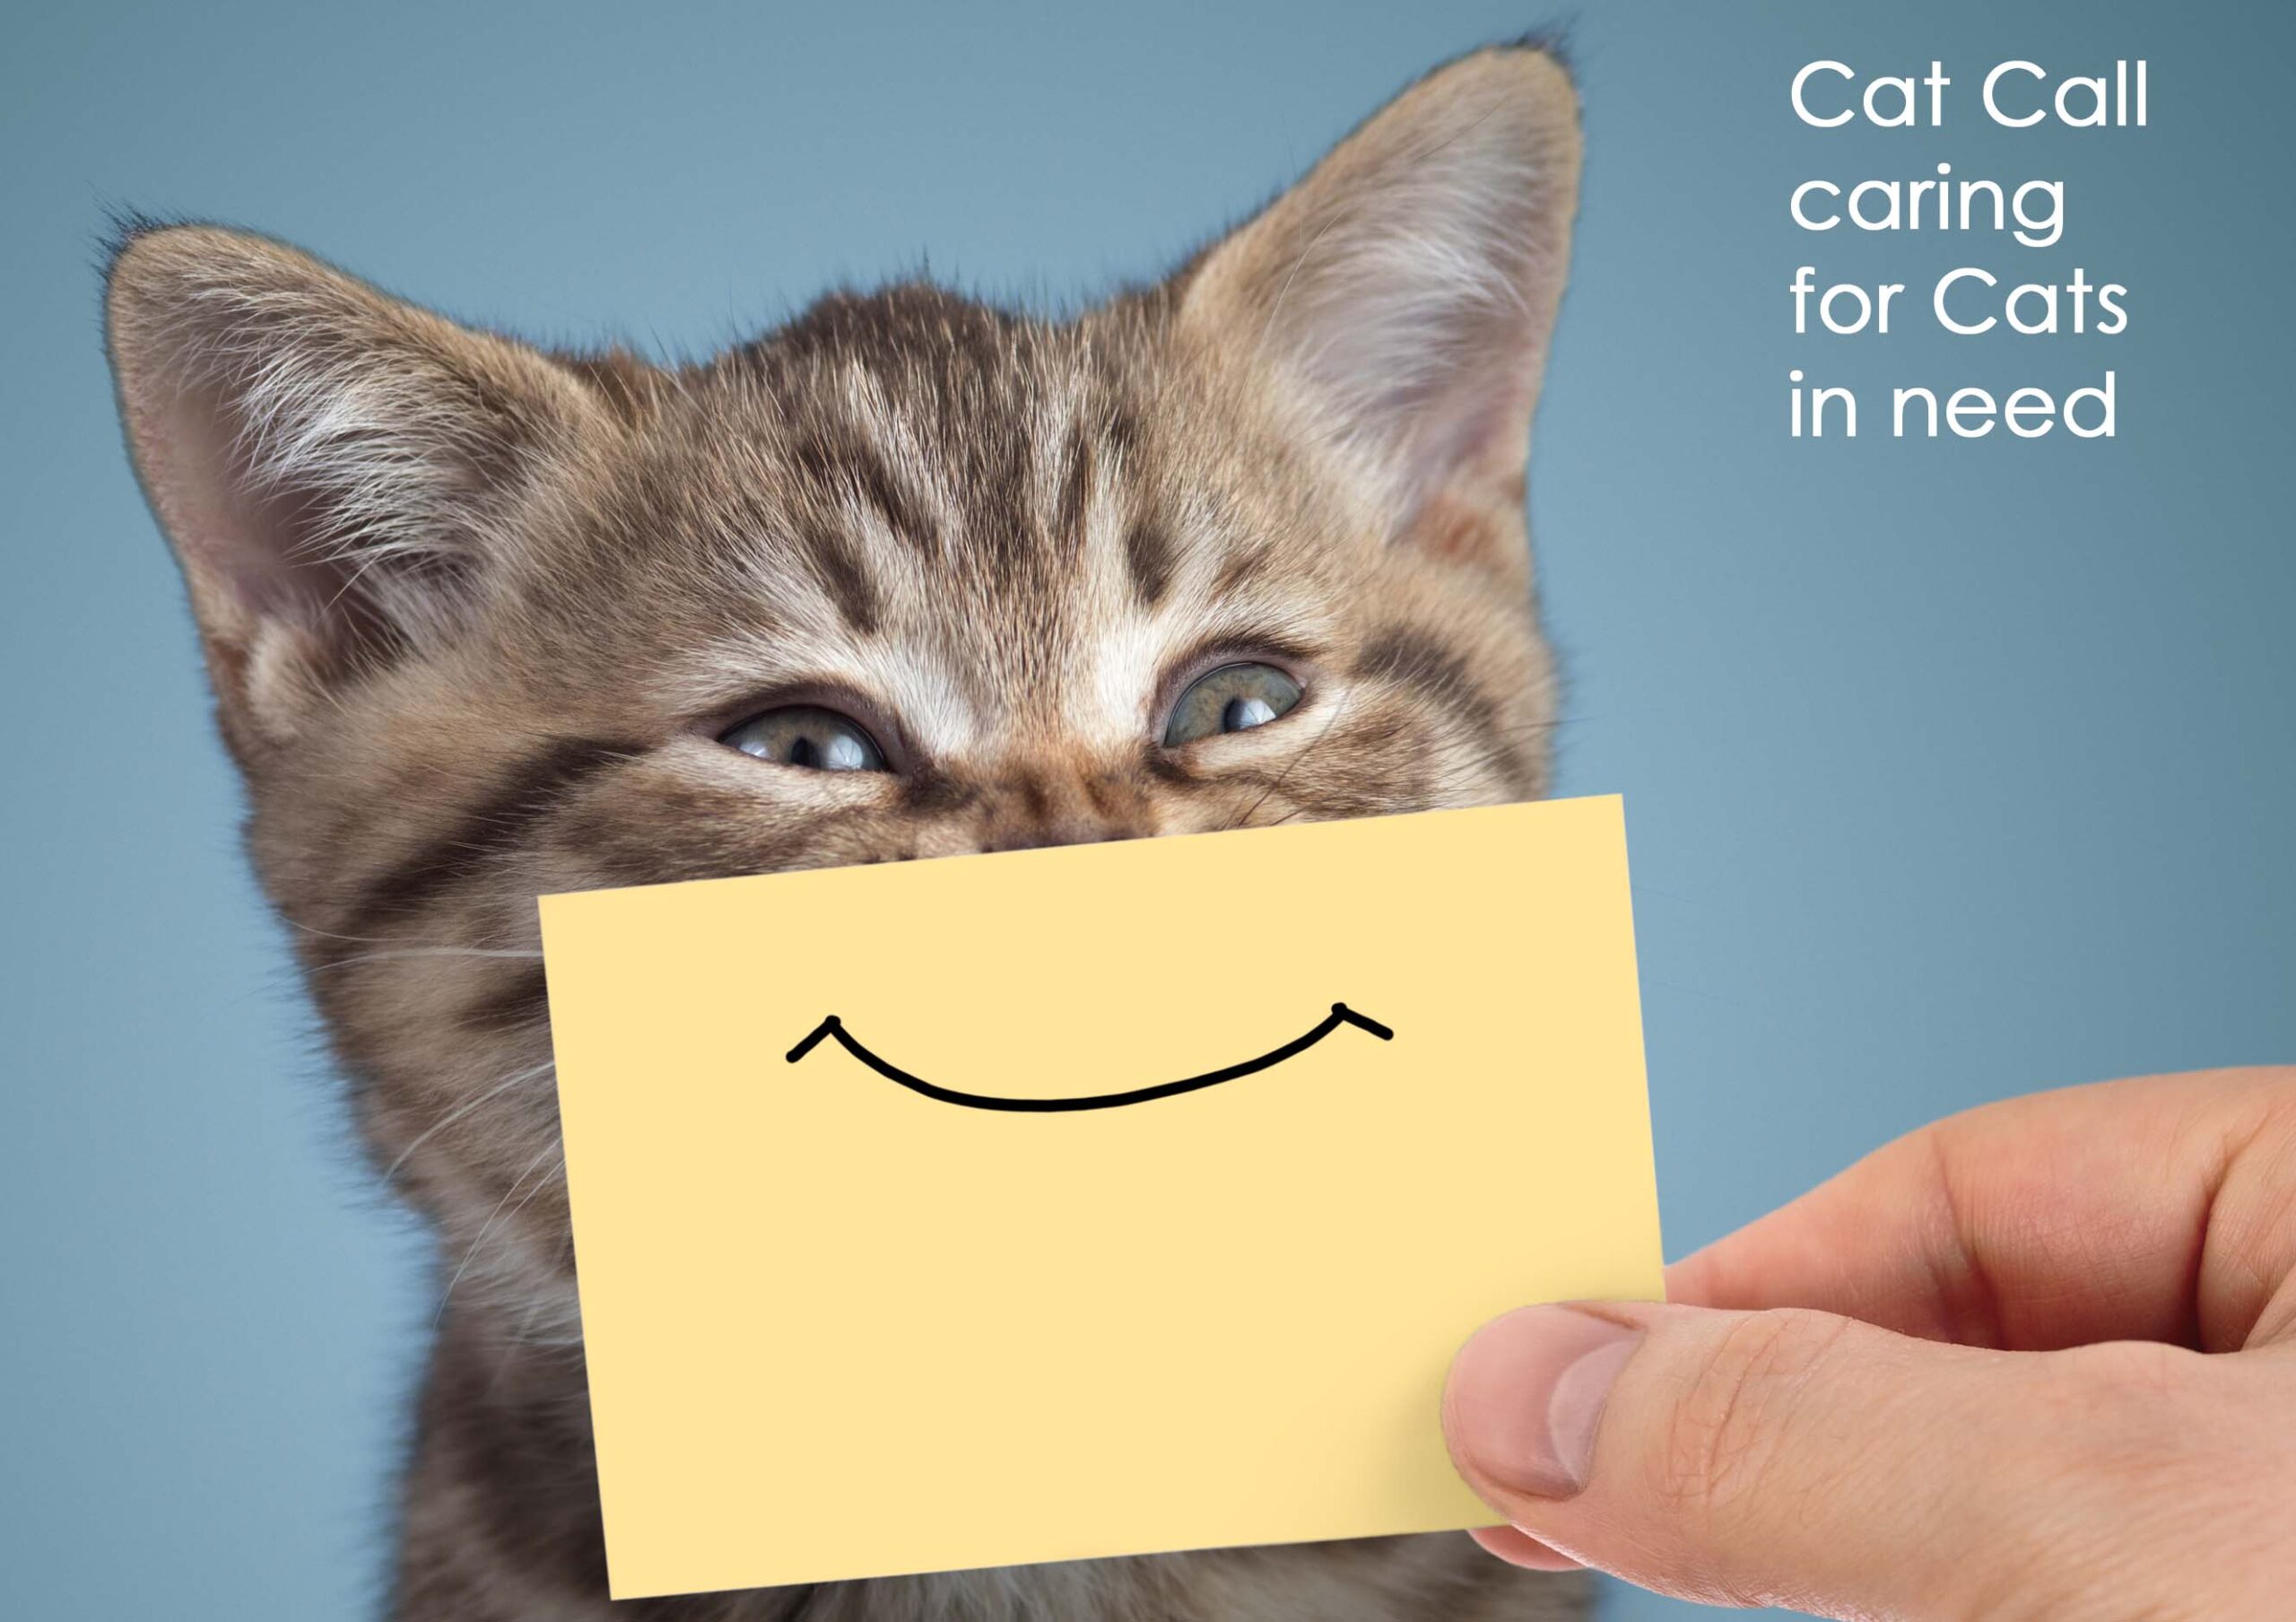 Nominate Cat Call then when you sepnd Amzon donate